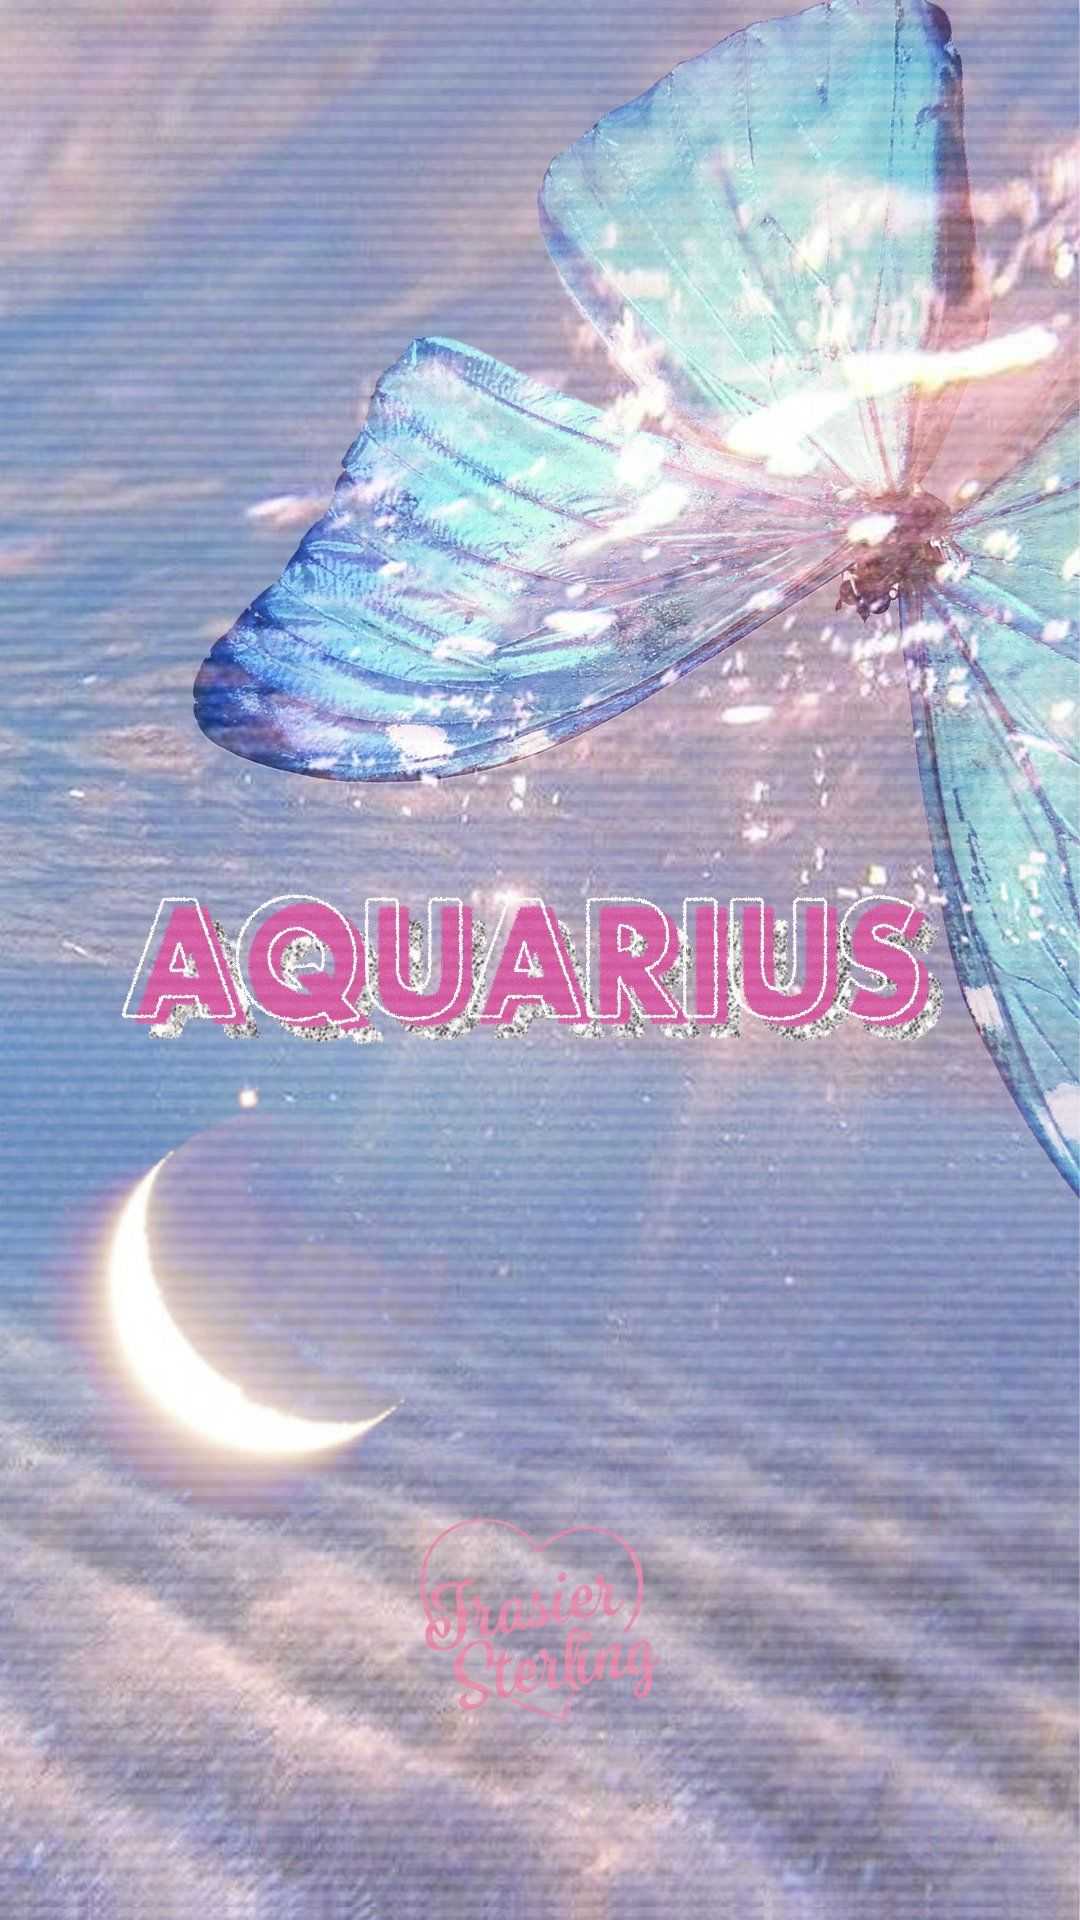 Aesthetic Aquarius iPhone Wallpaper with high-resolution 1080x1920 pixel. You can use this wallpaper for your iPhone 5, 6, 7, 8, X, XS, XR backgrounds, Mobile Screensaver, or iPad Lock Screen - Aquarius